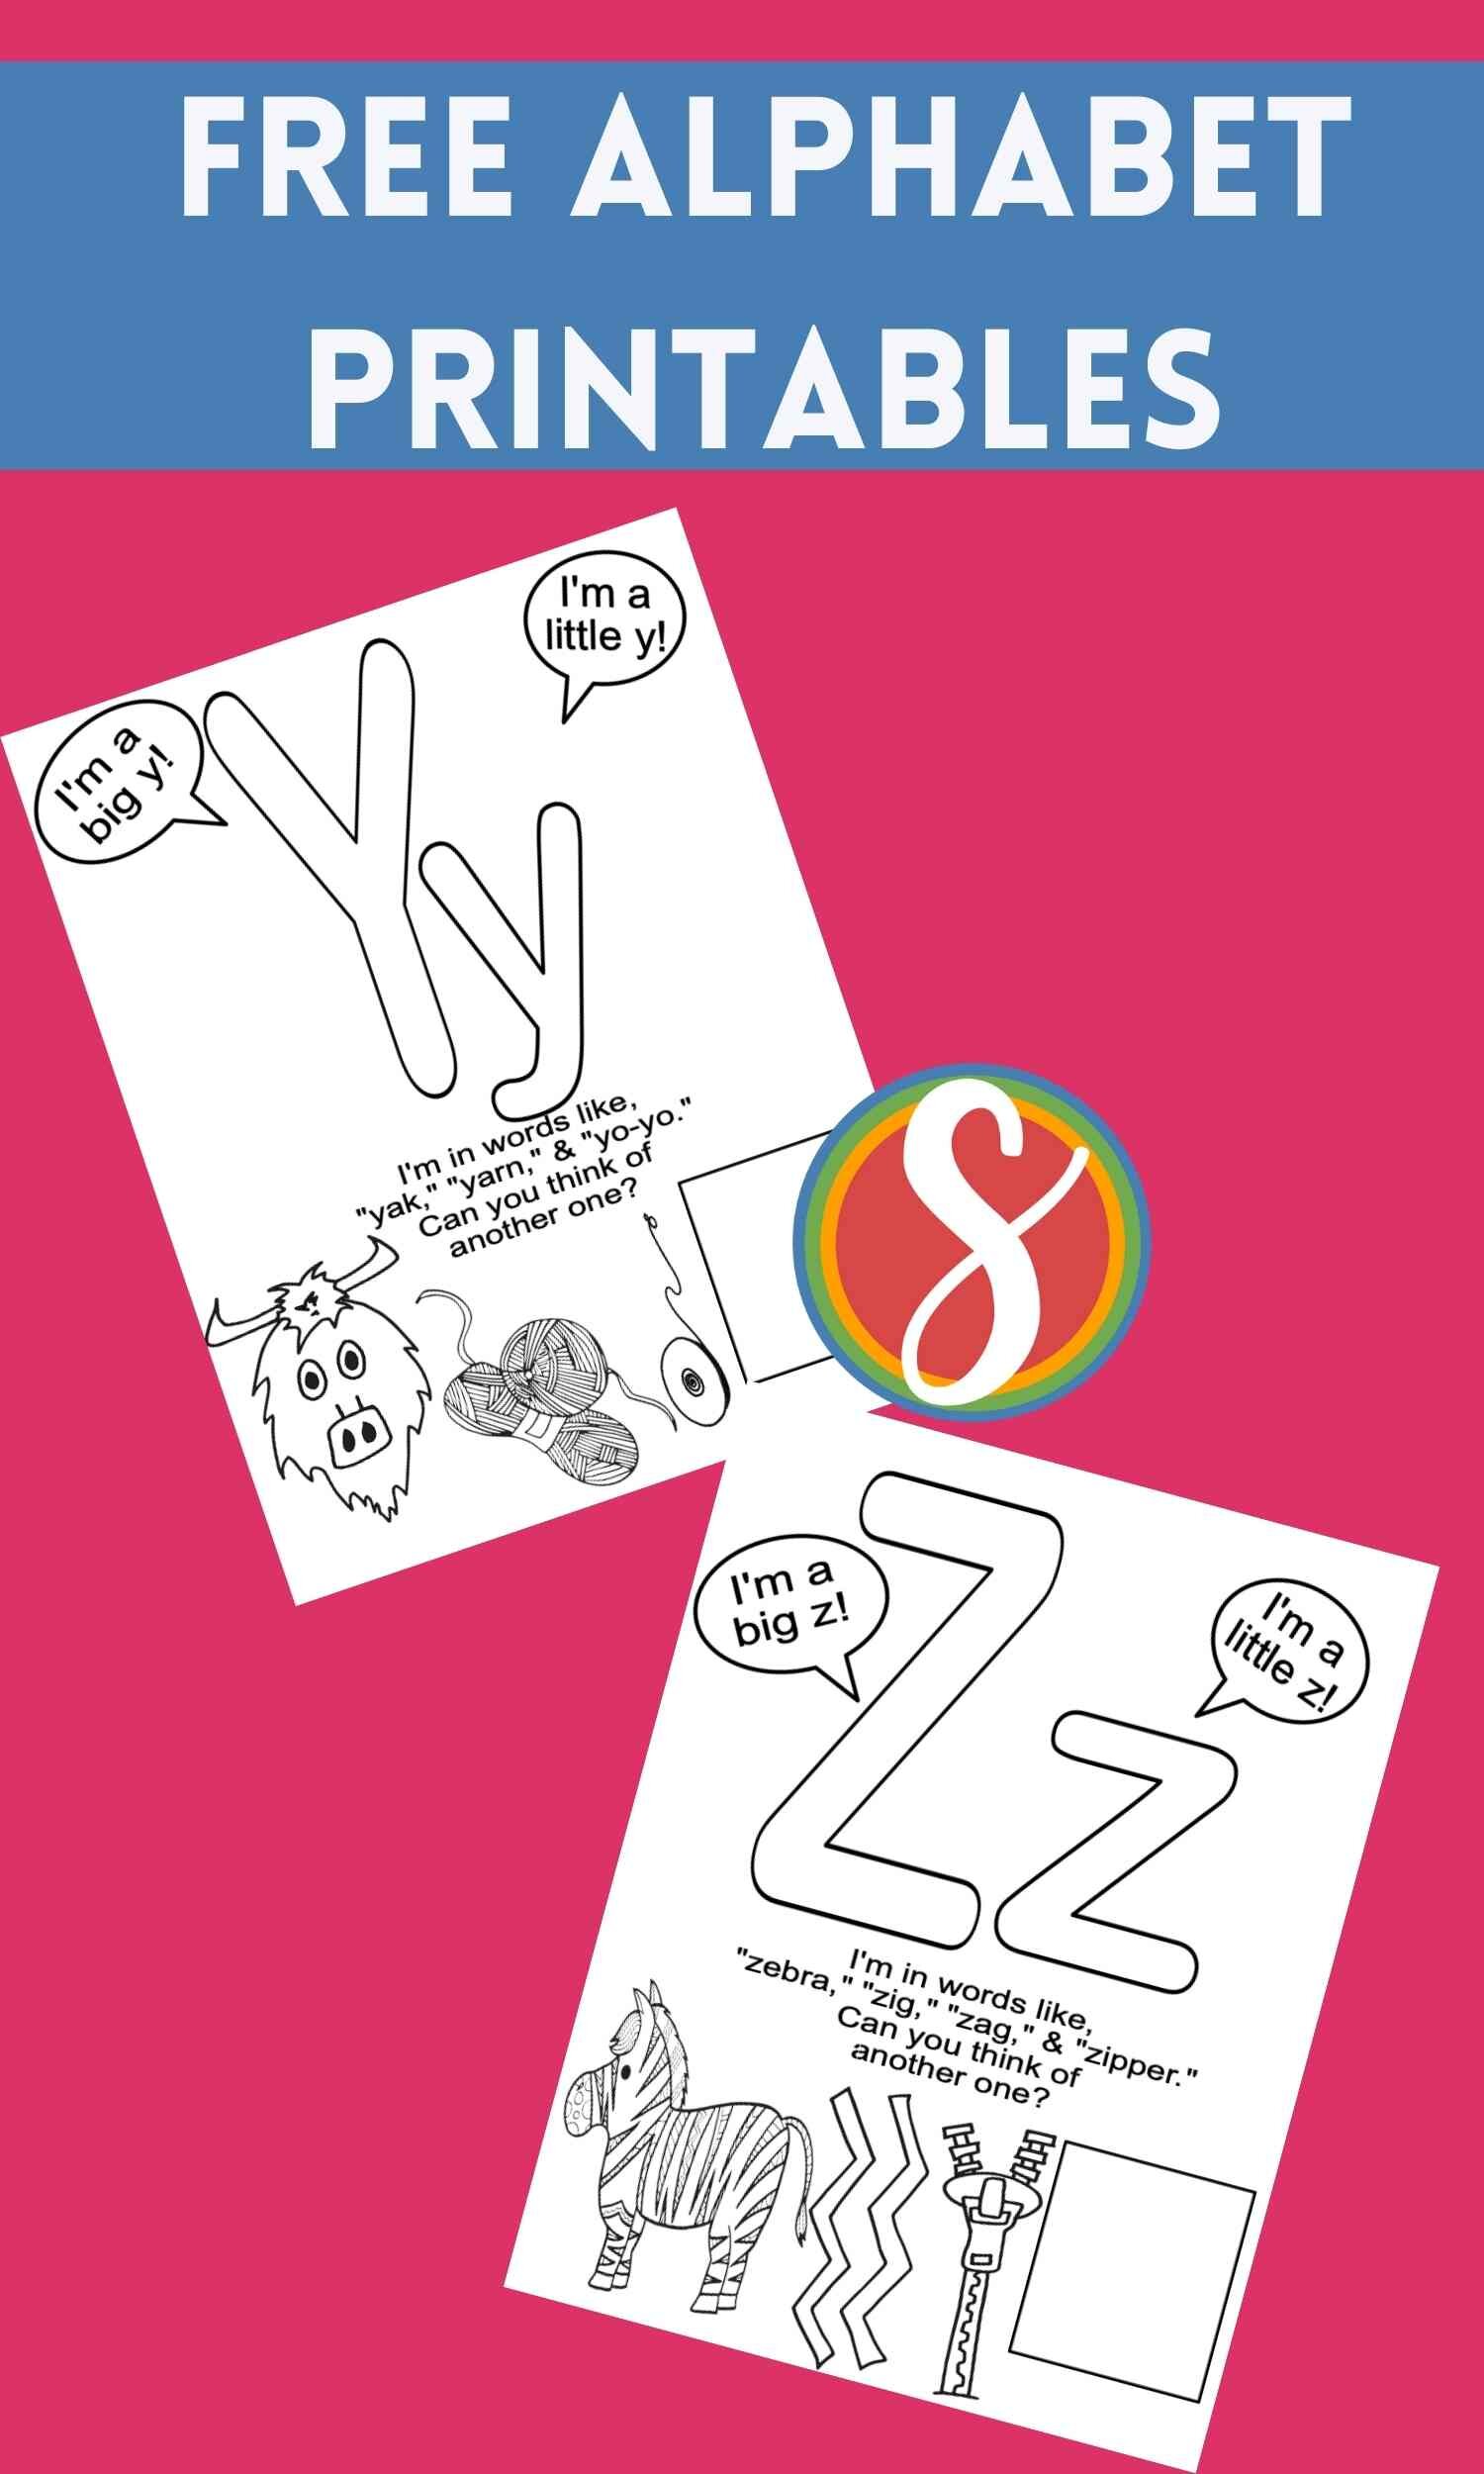 Free! 26 free activity sheets free to print and color from Stevie Doodles - free alphabet printables you can have today for your preschool and/or kindergarten activities